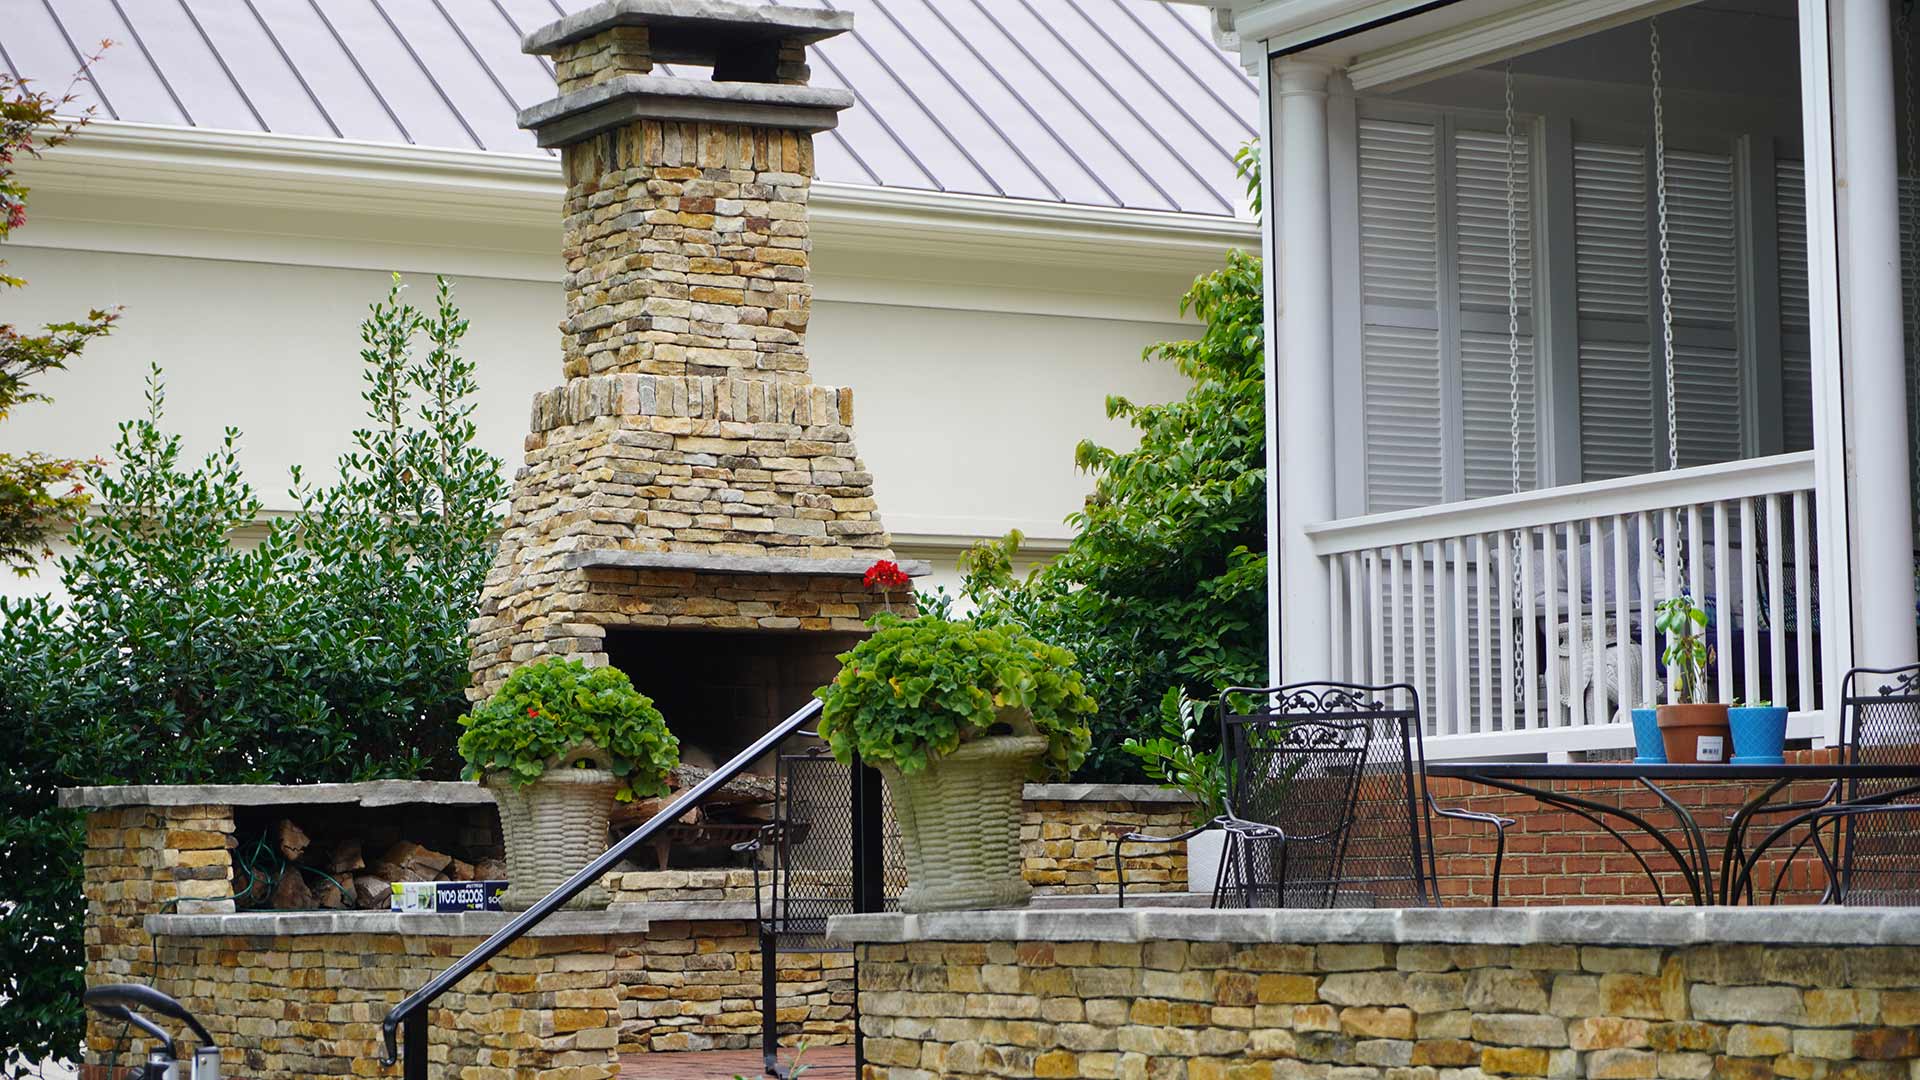 Fireplace built over patio in Fayetteville, TN.